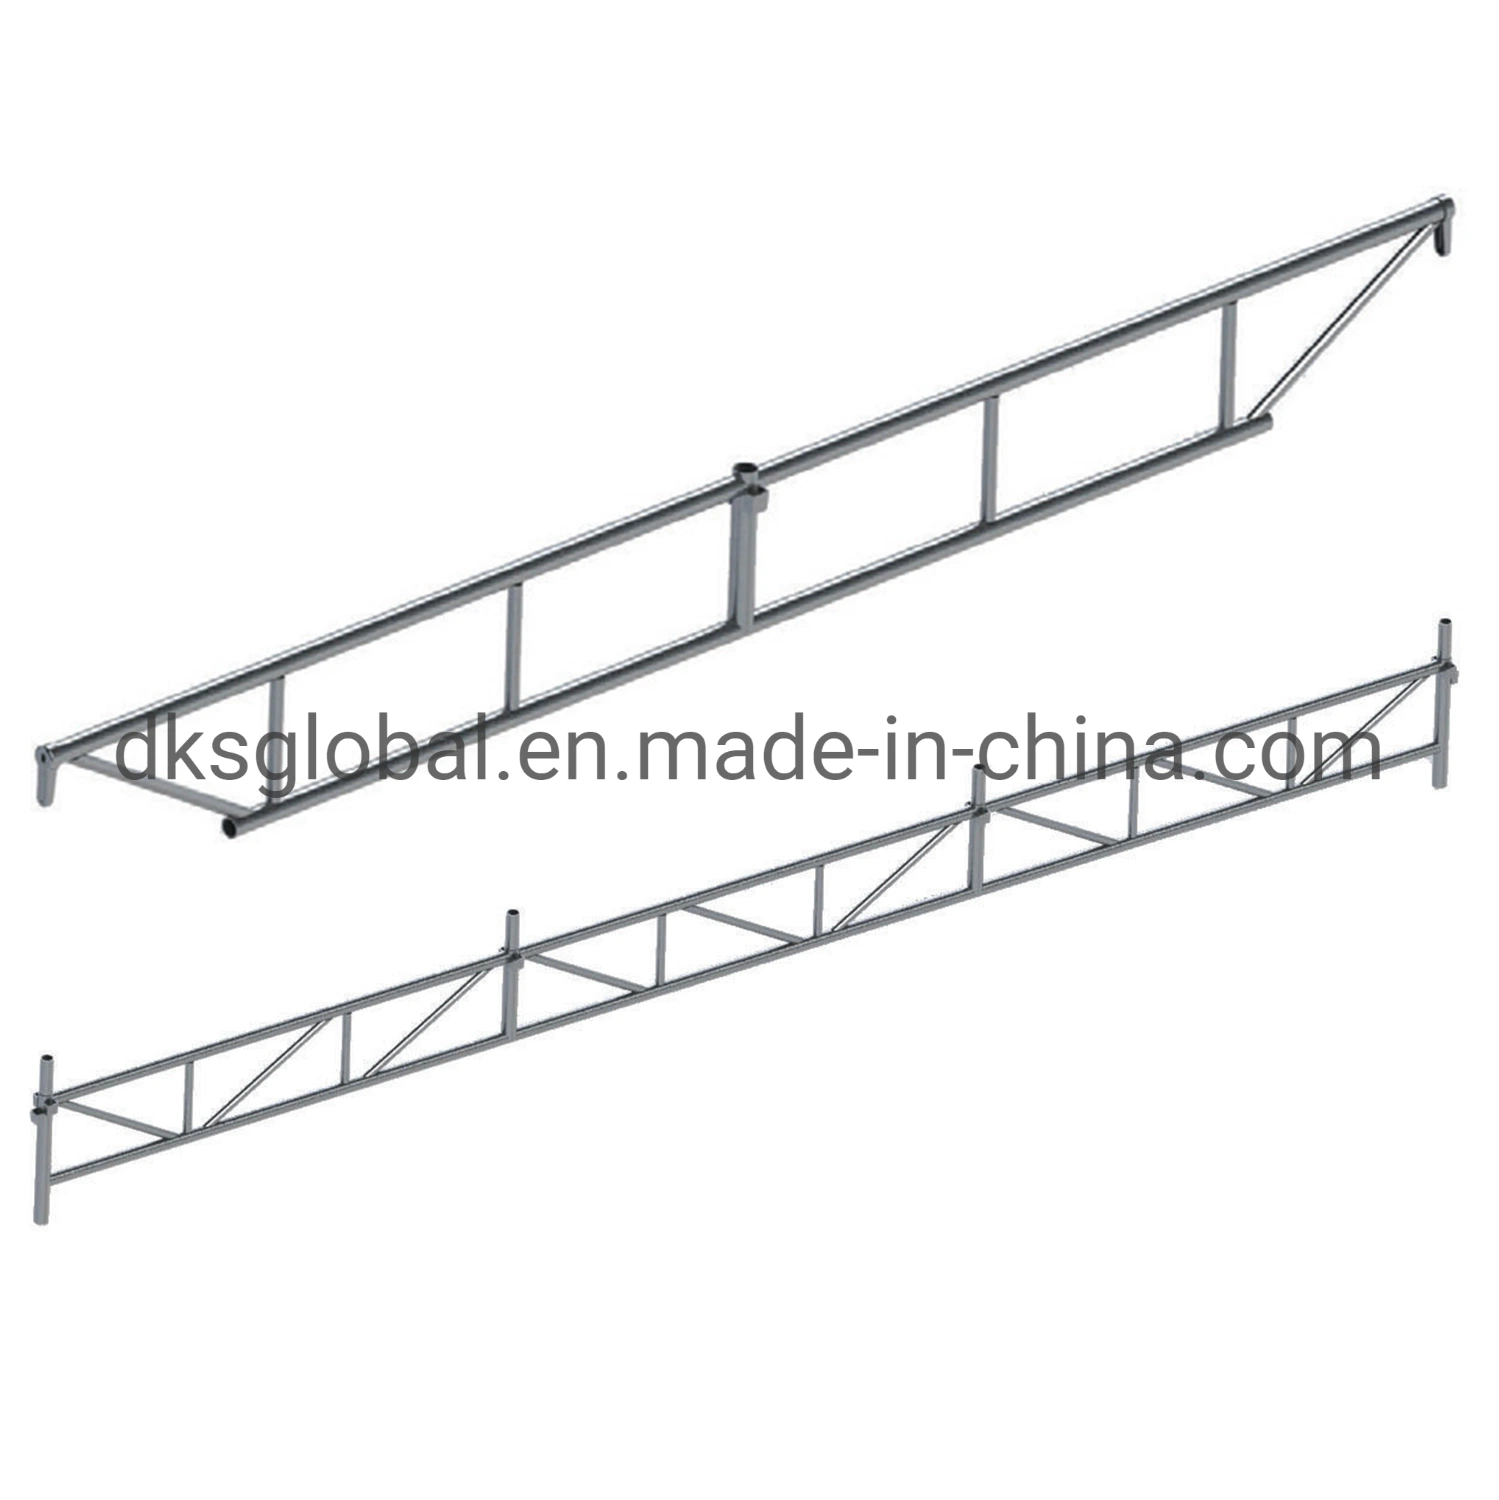 Building Convinent Quialified Steel Safety Step Scaffold Stairs Material ISO